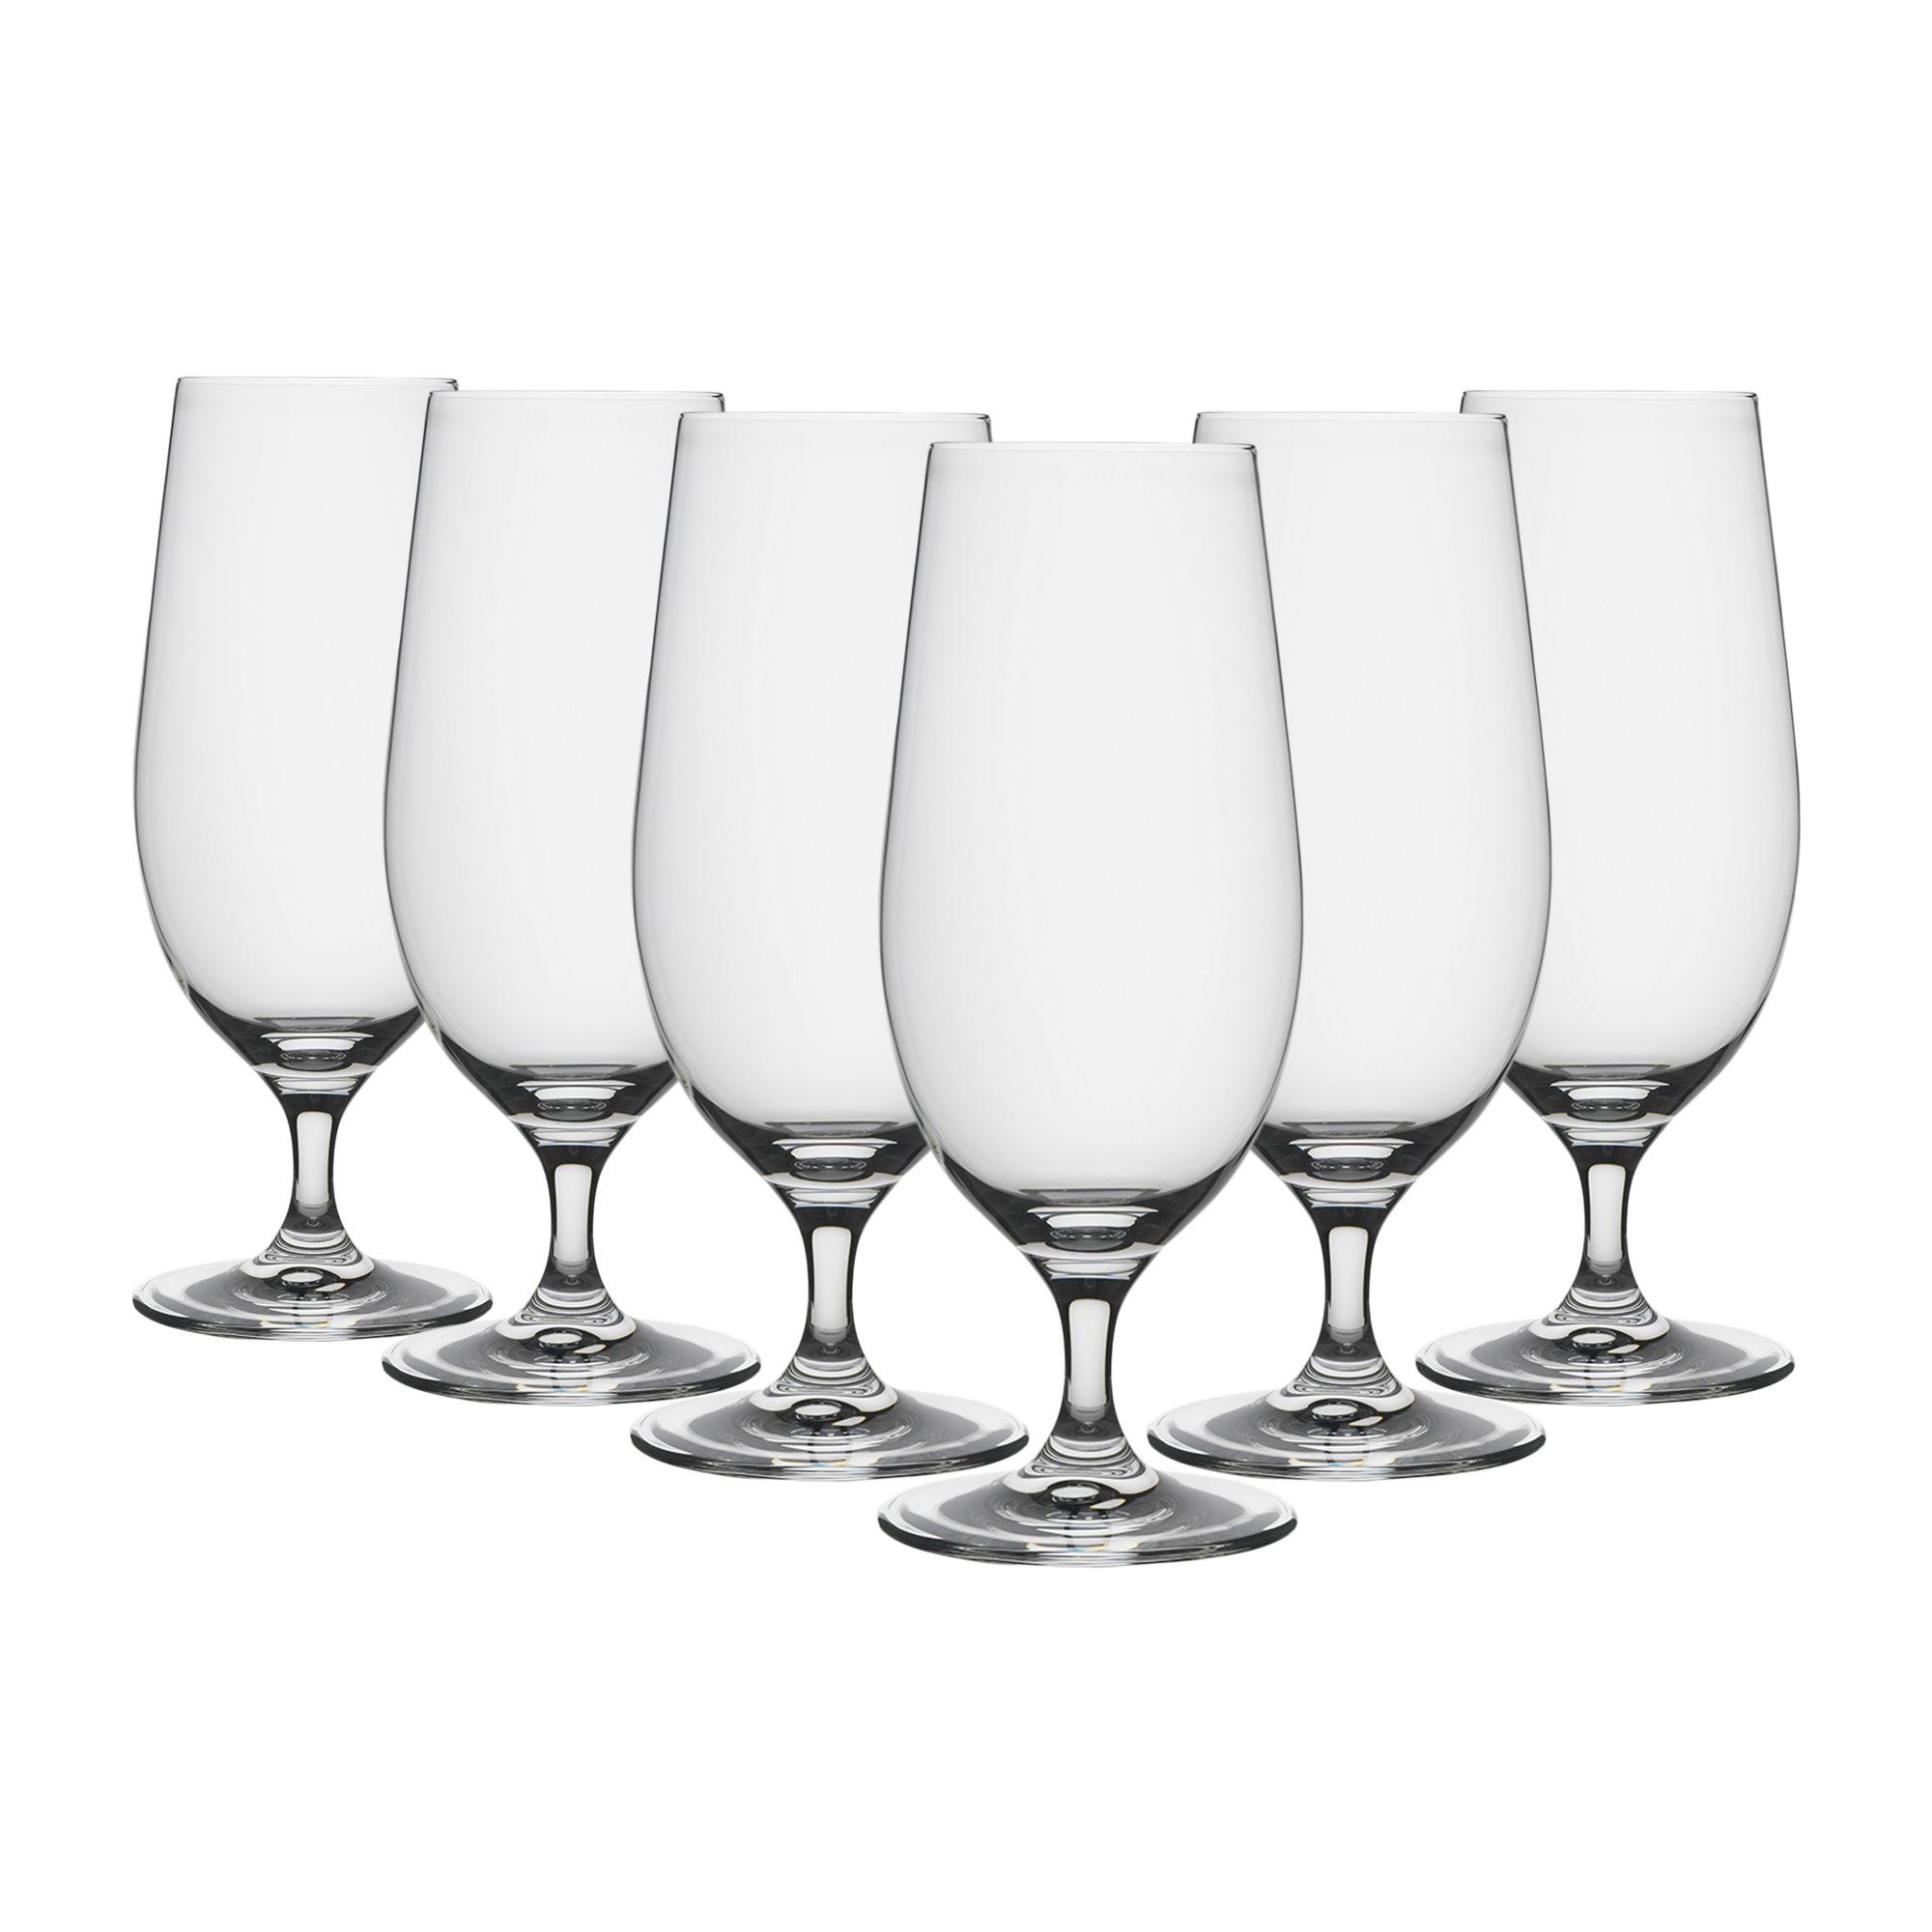 Ecology Classic Stem Beer Glass 460ml Set of 6 Image 1